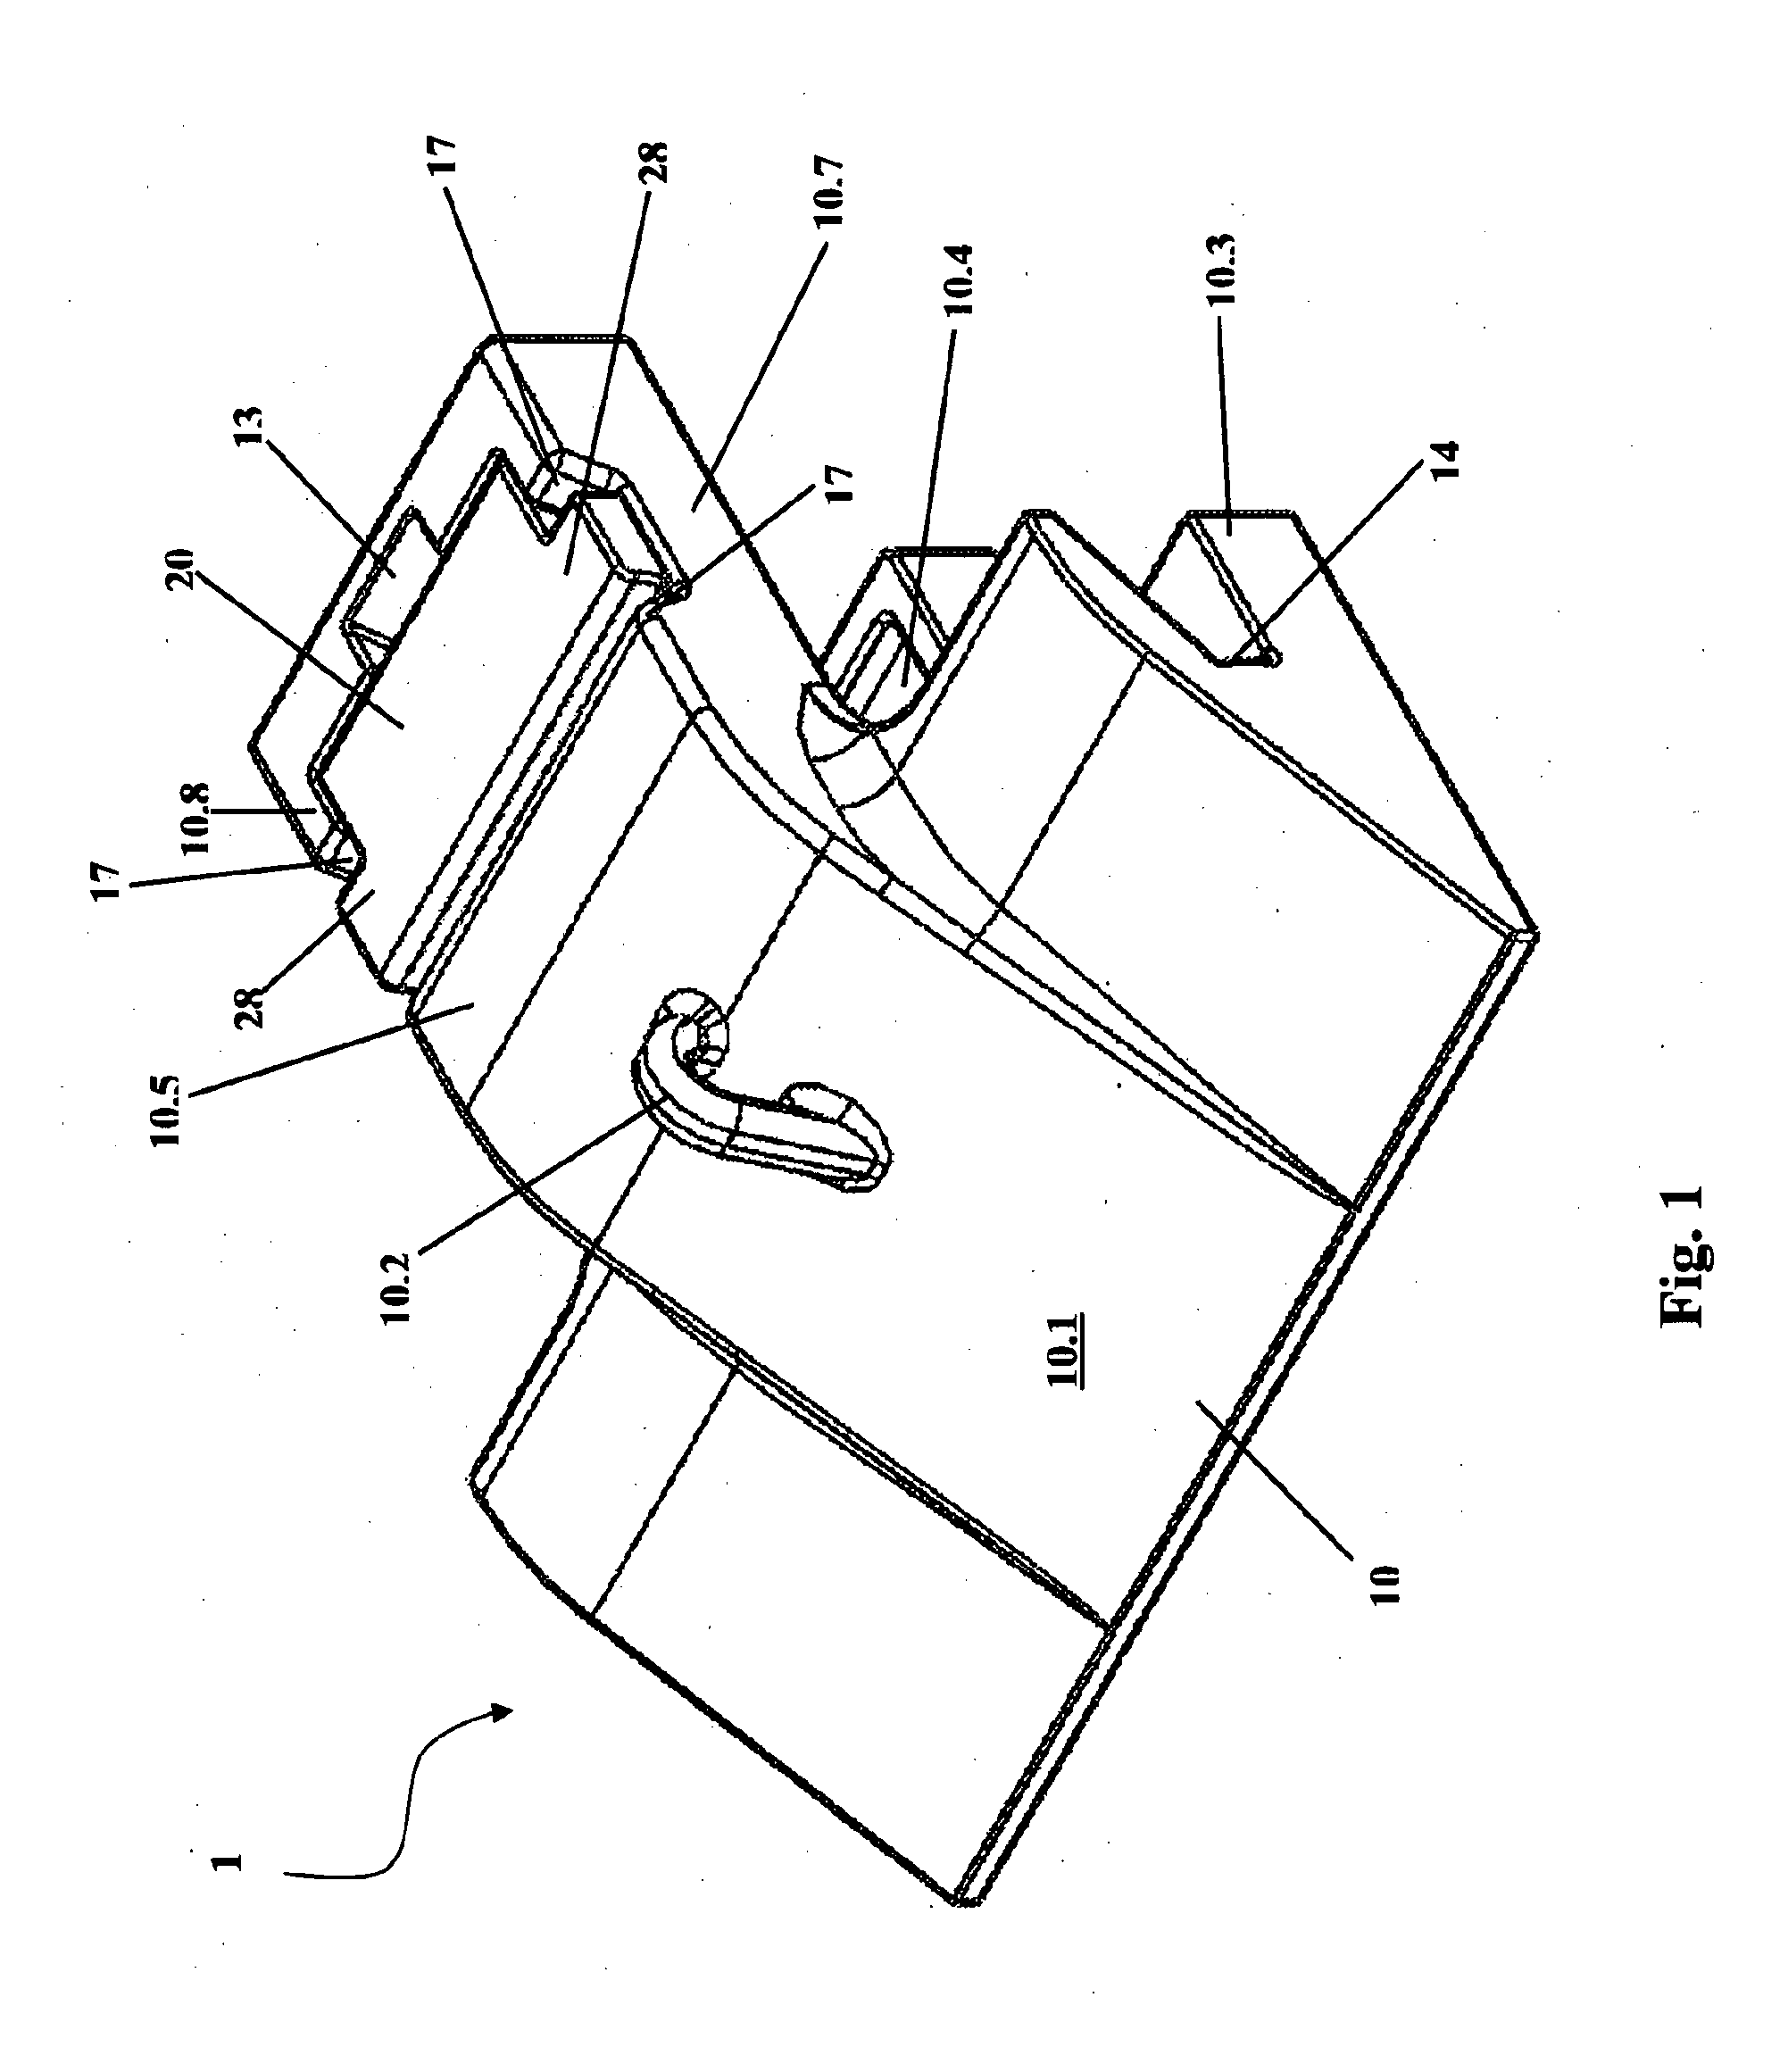 Wear Assembly and Lock Mechanism